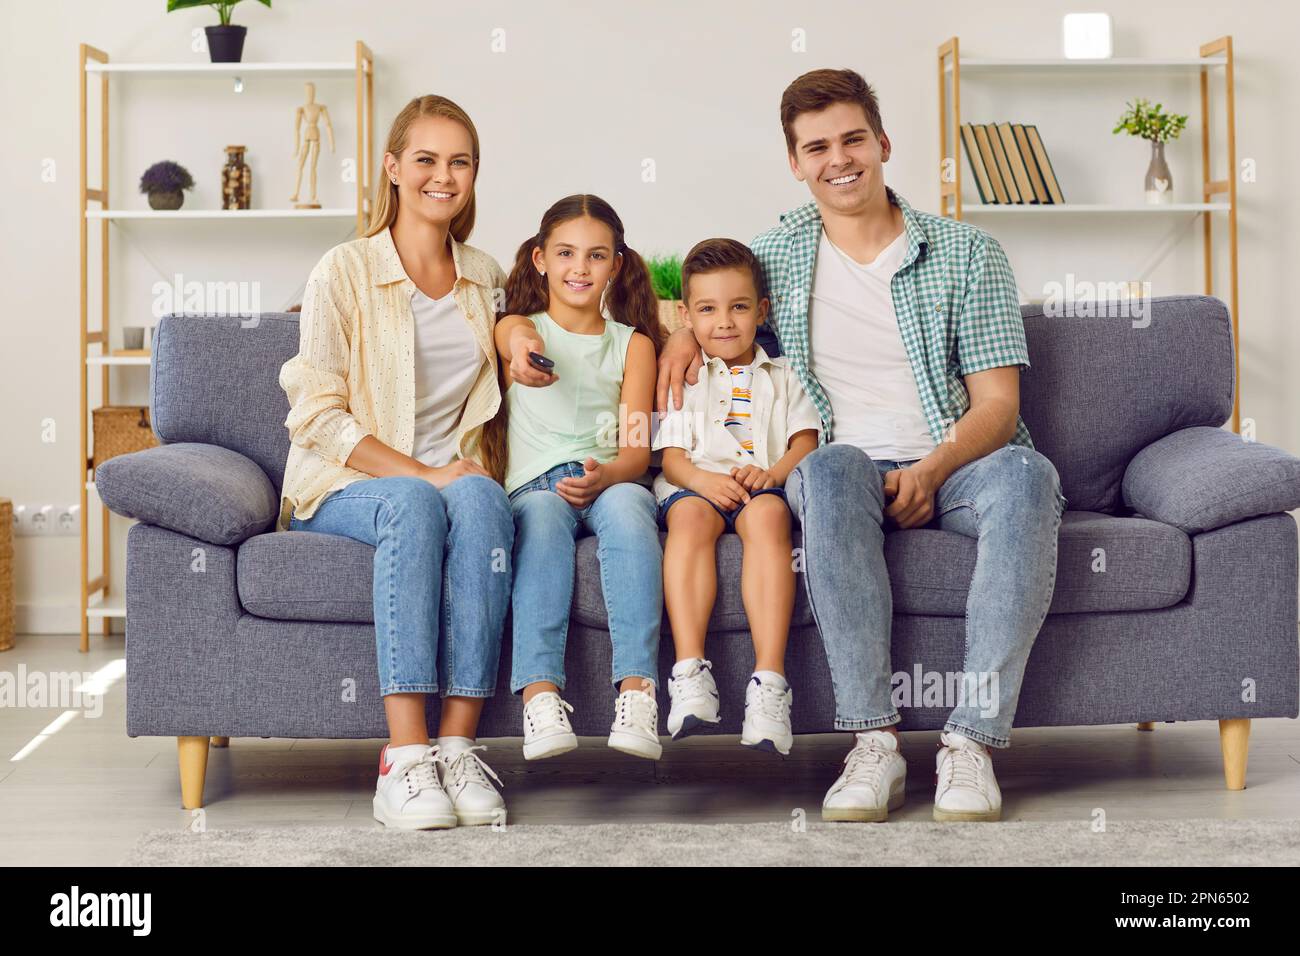 Young happy Caucasian family with two children watching TV together sitting on sofa in living room. Stock Photo